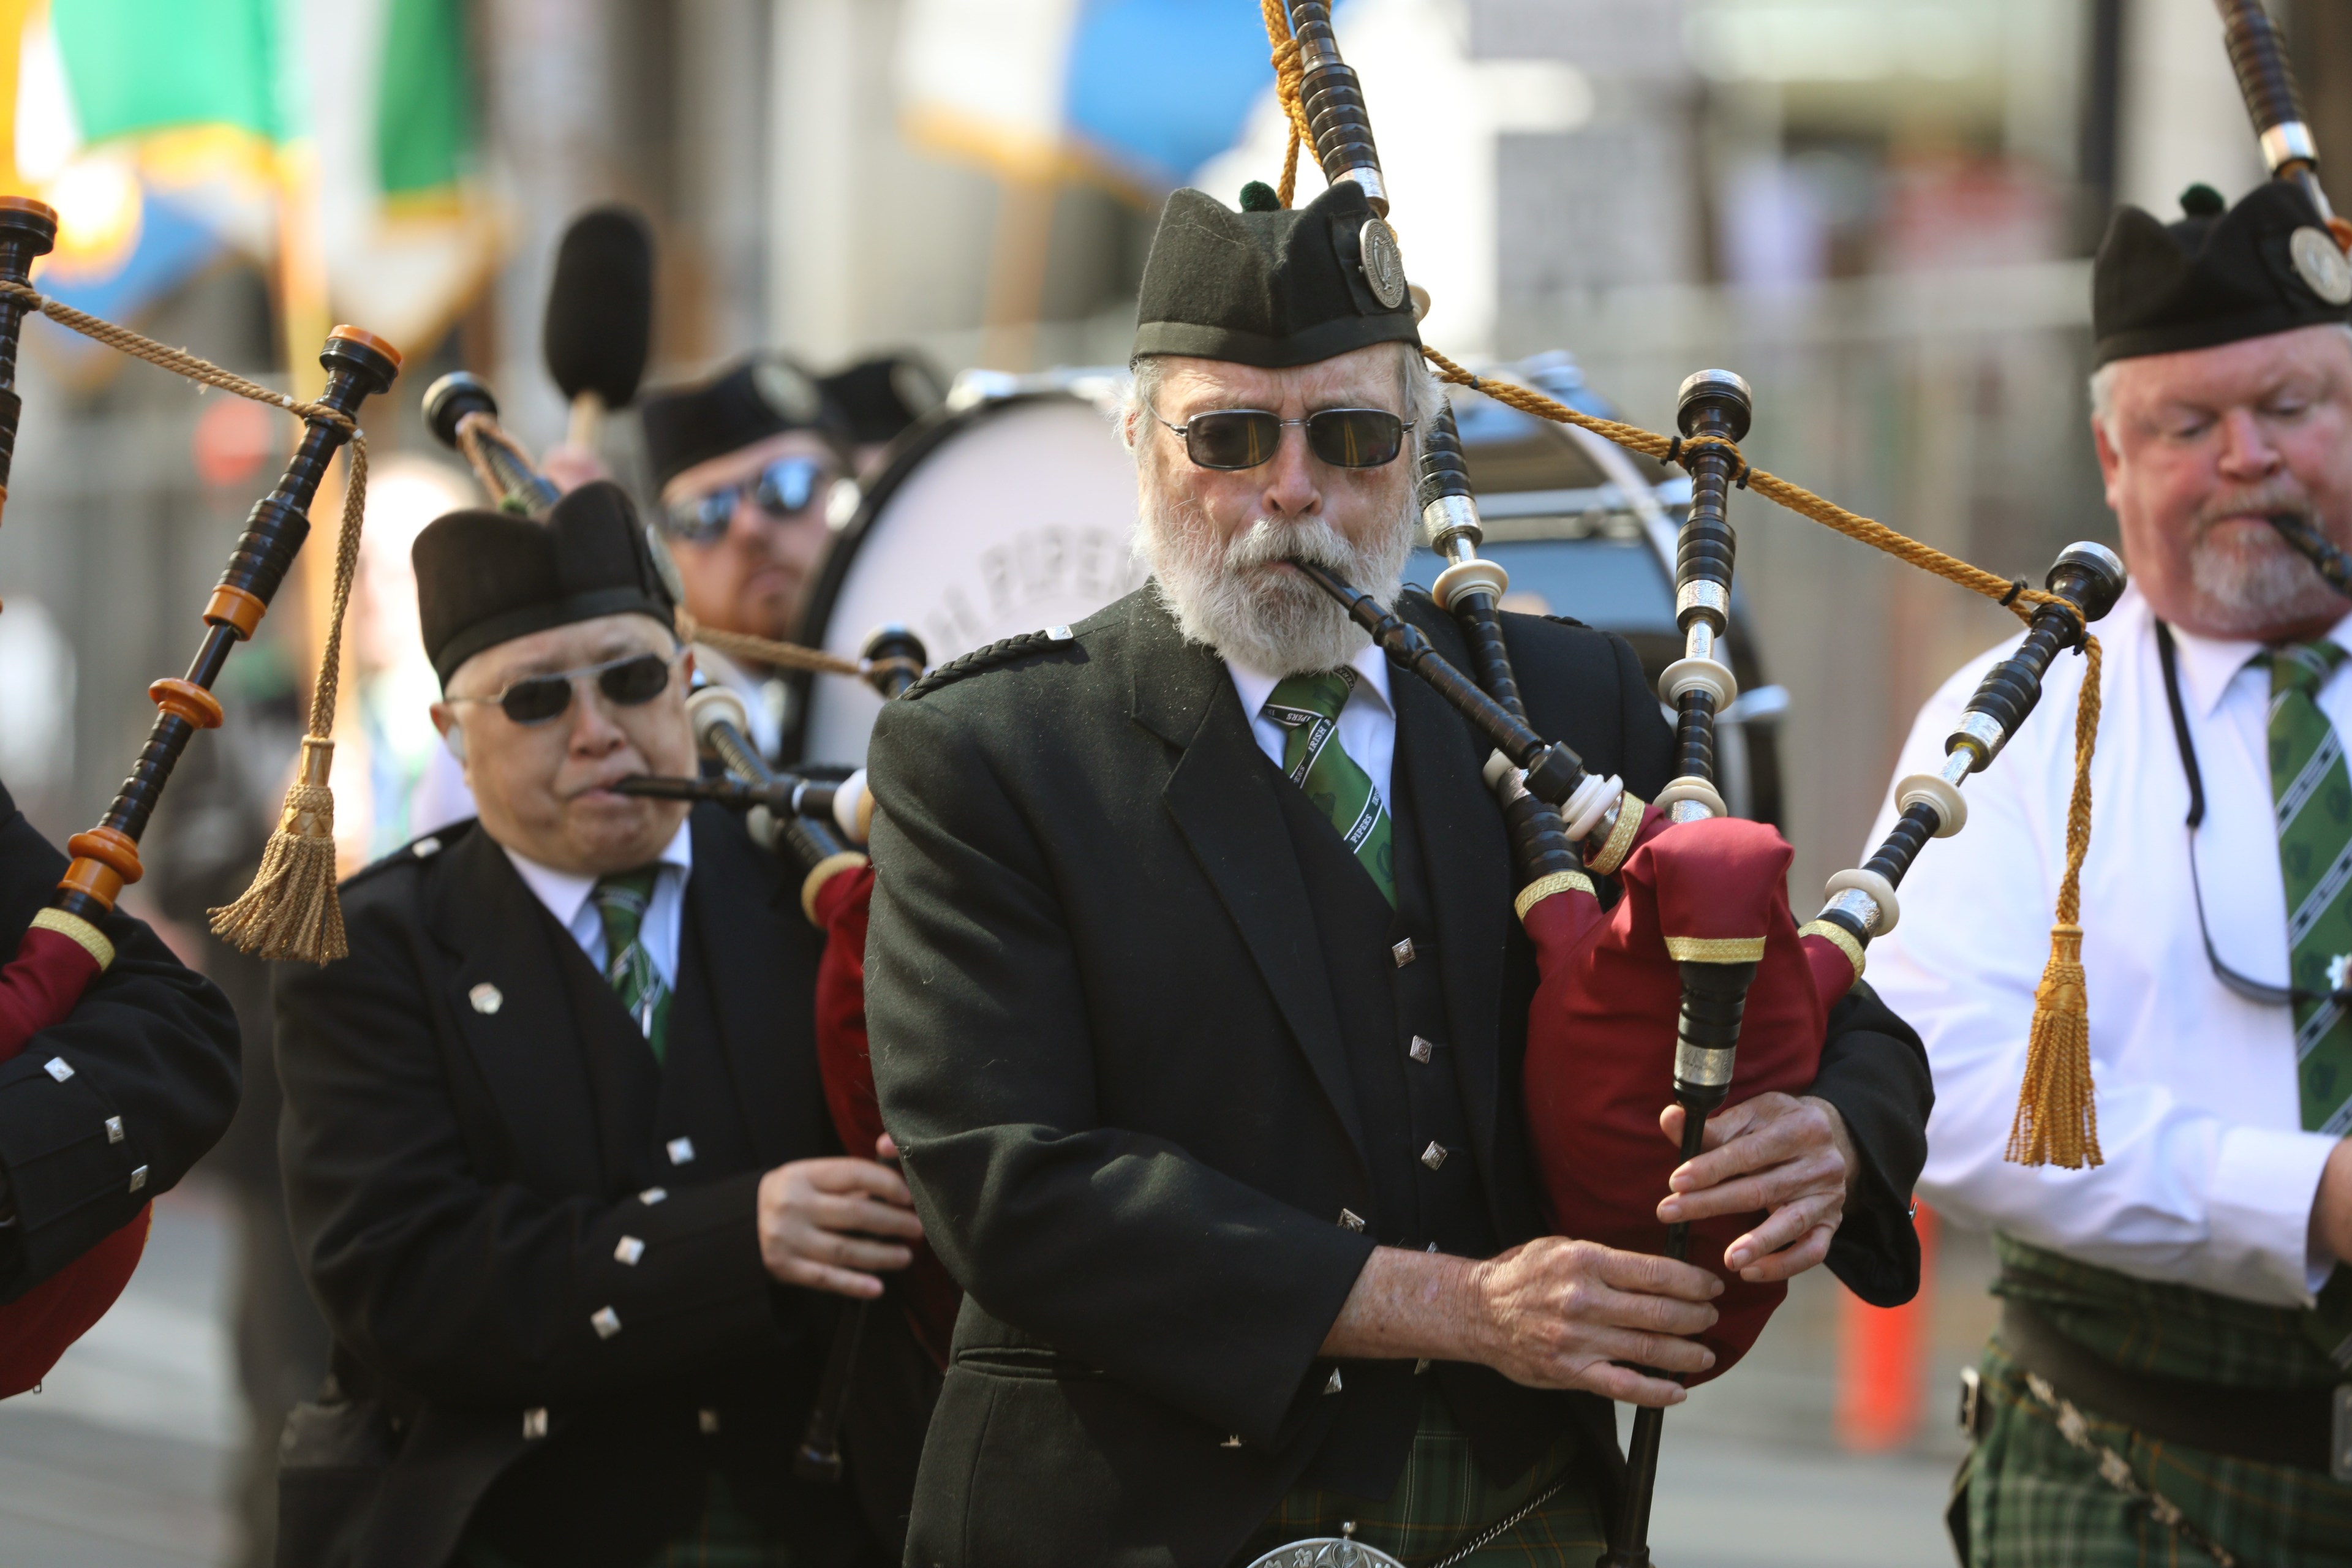 Men in traditional Scottish attire play bagpipes in a parade.